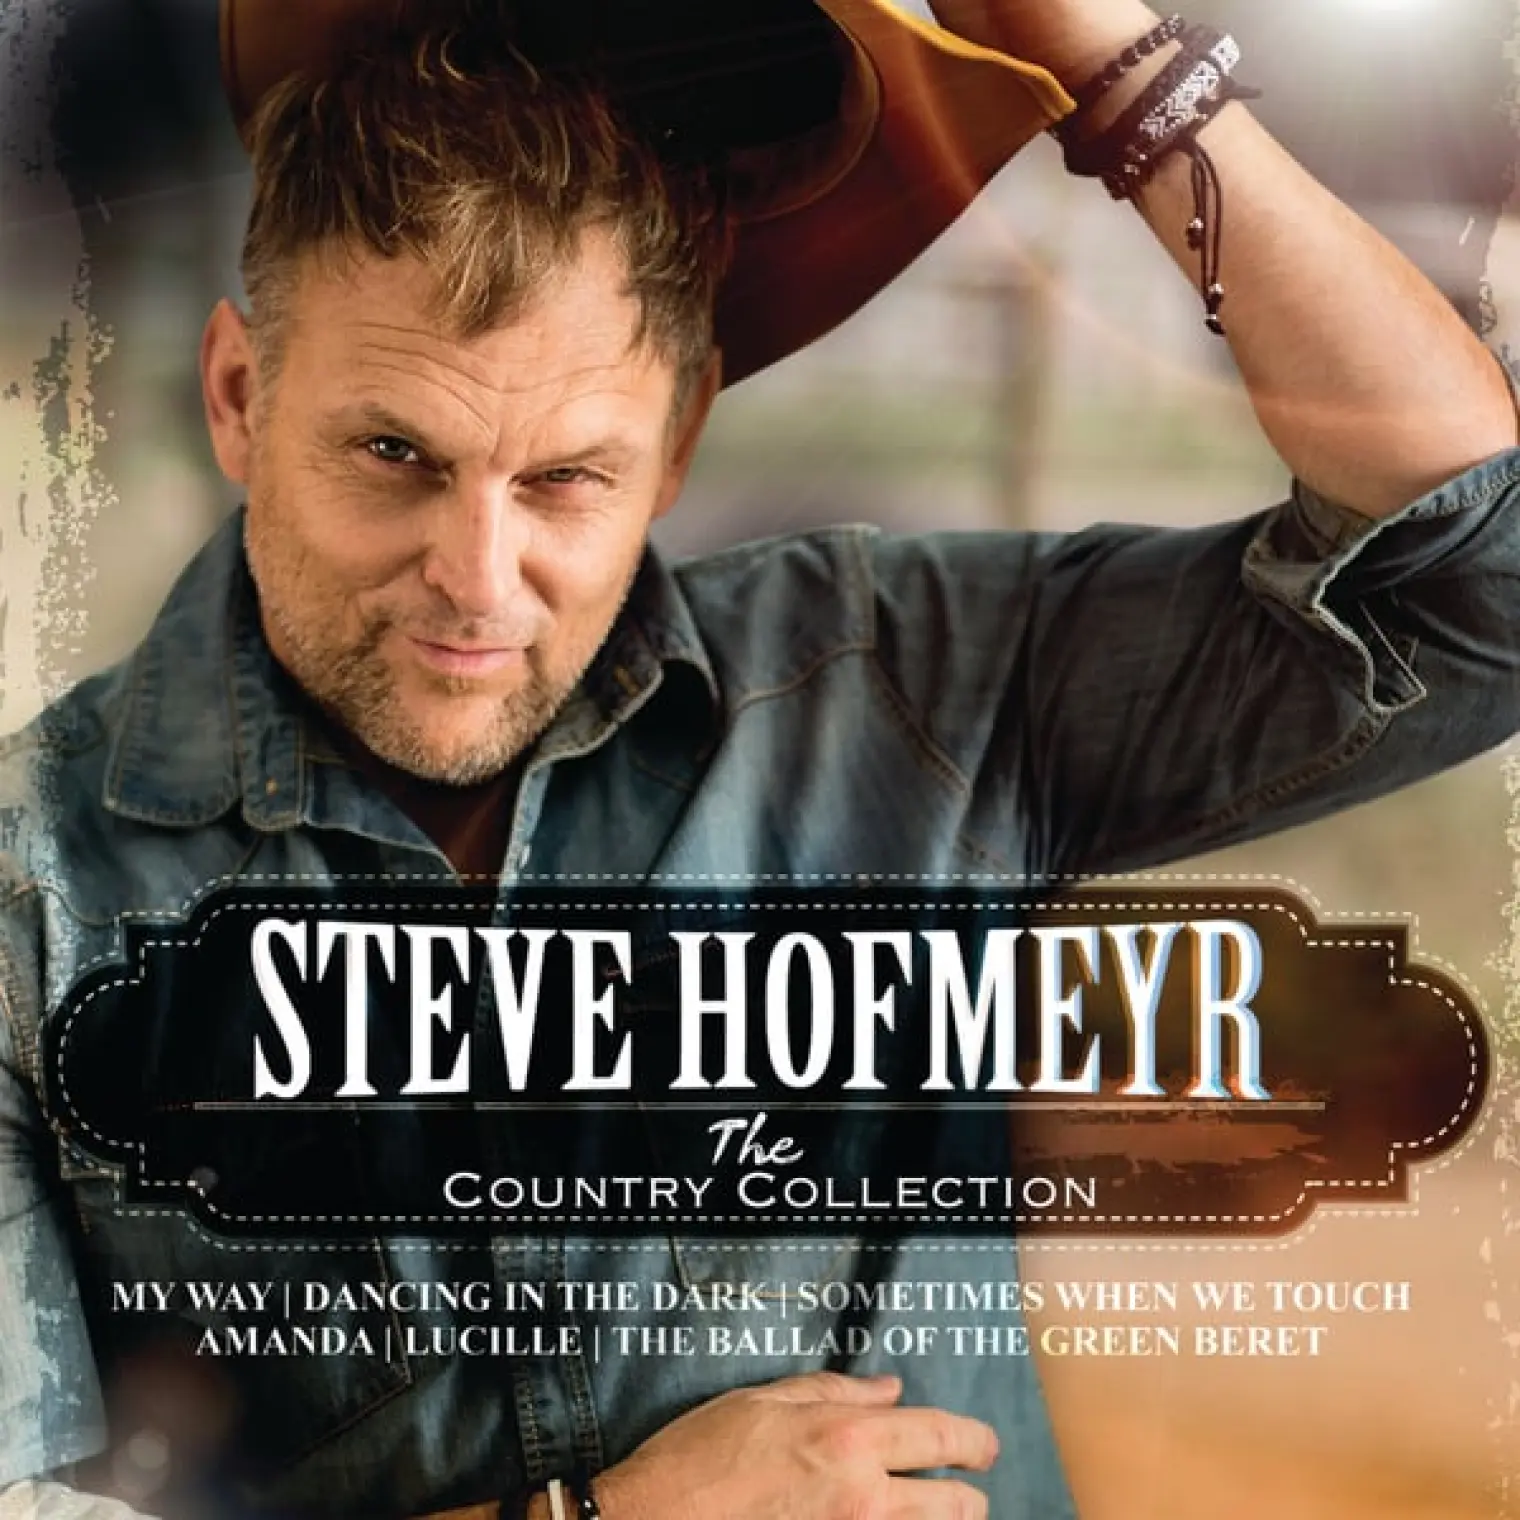 The Country Collection -  Steve Hofmeyr 